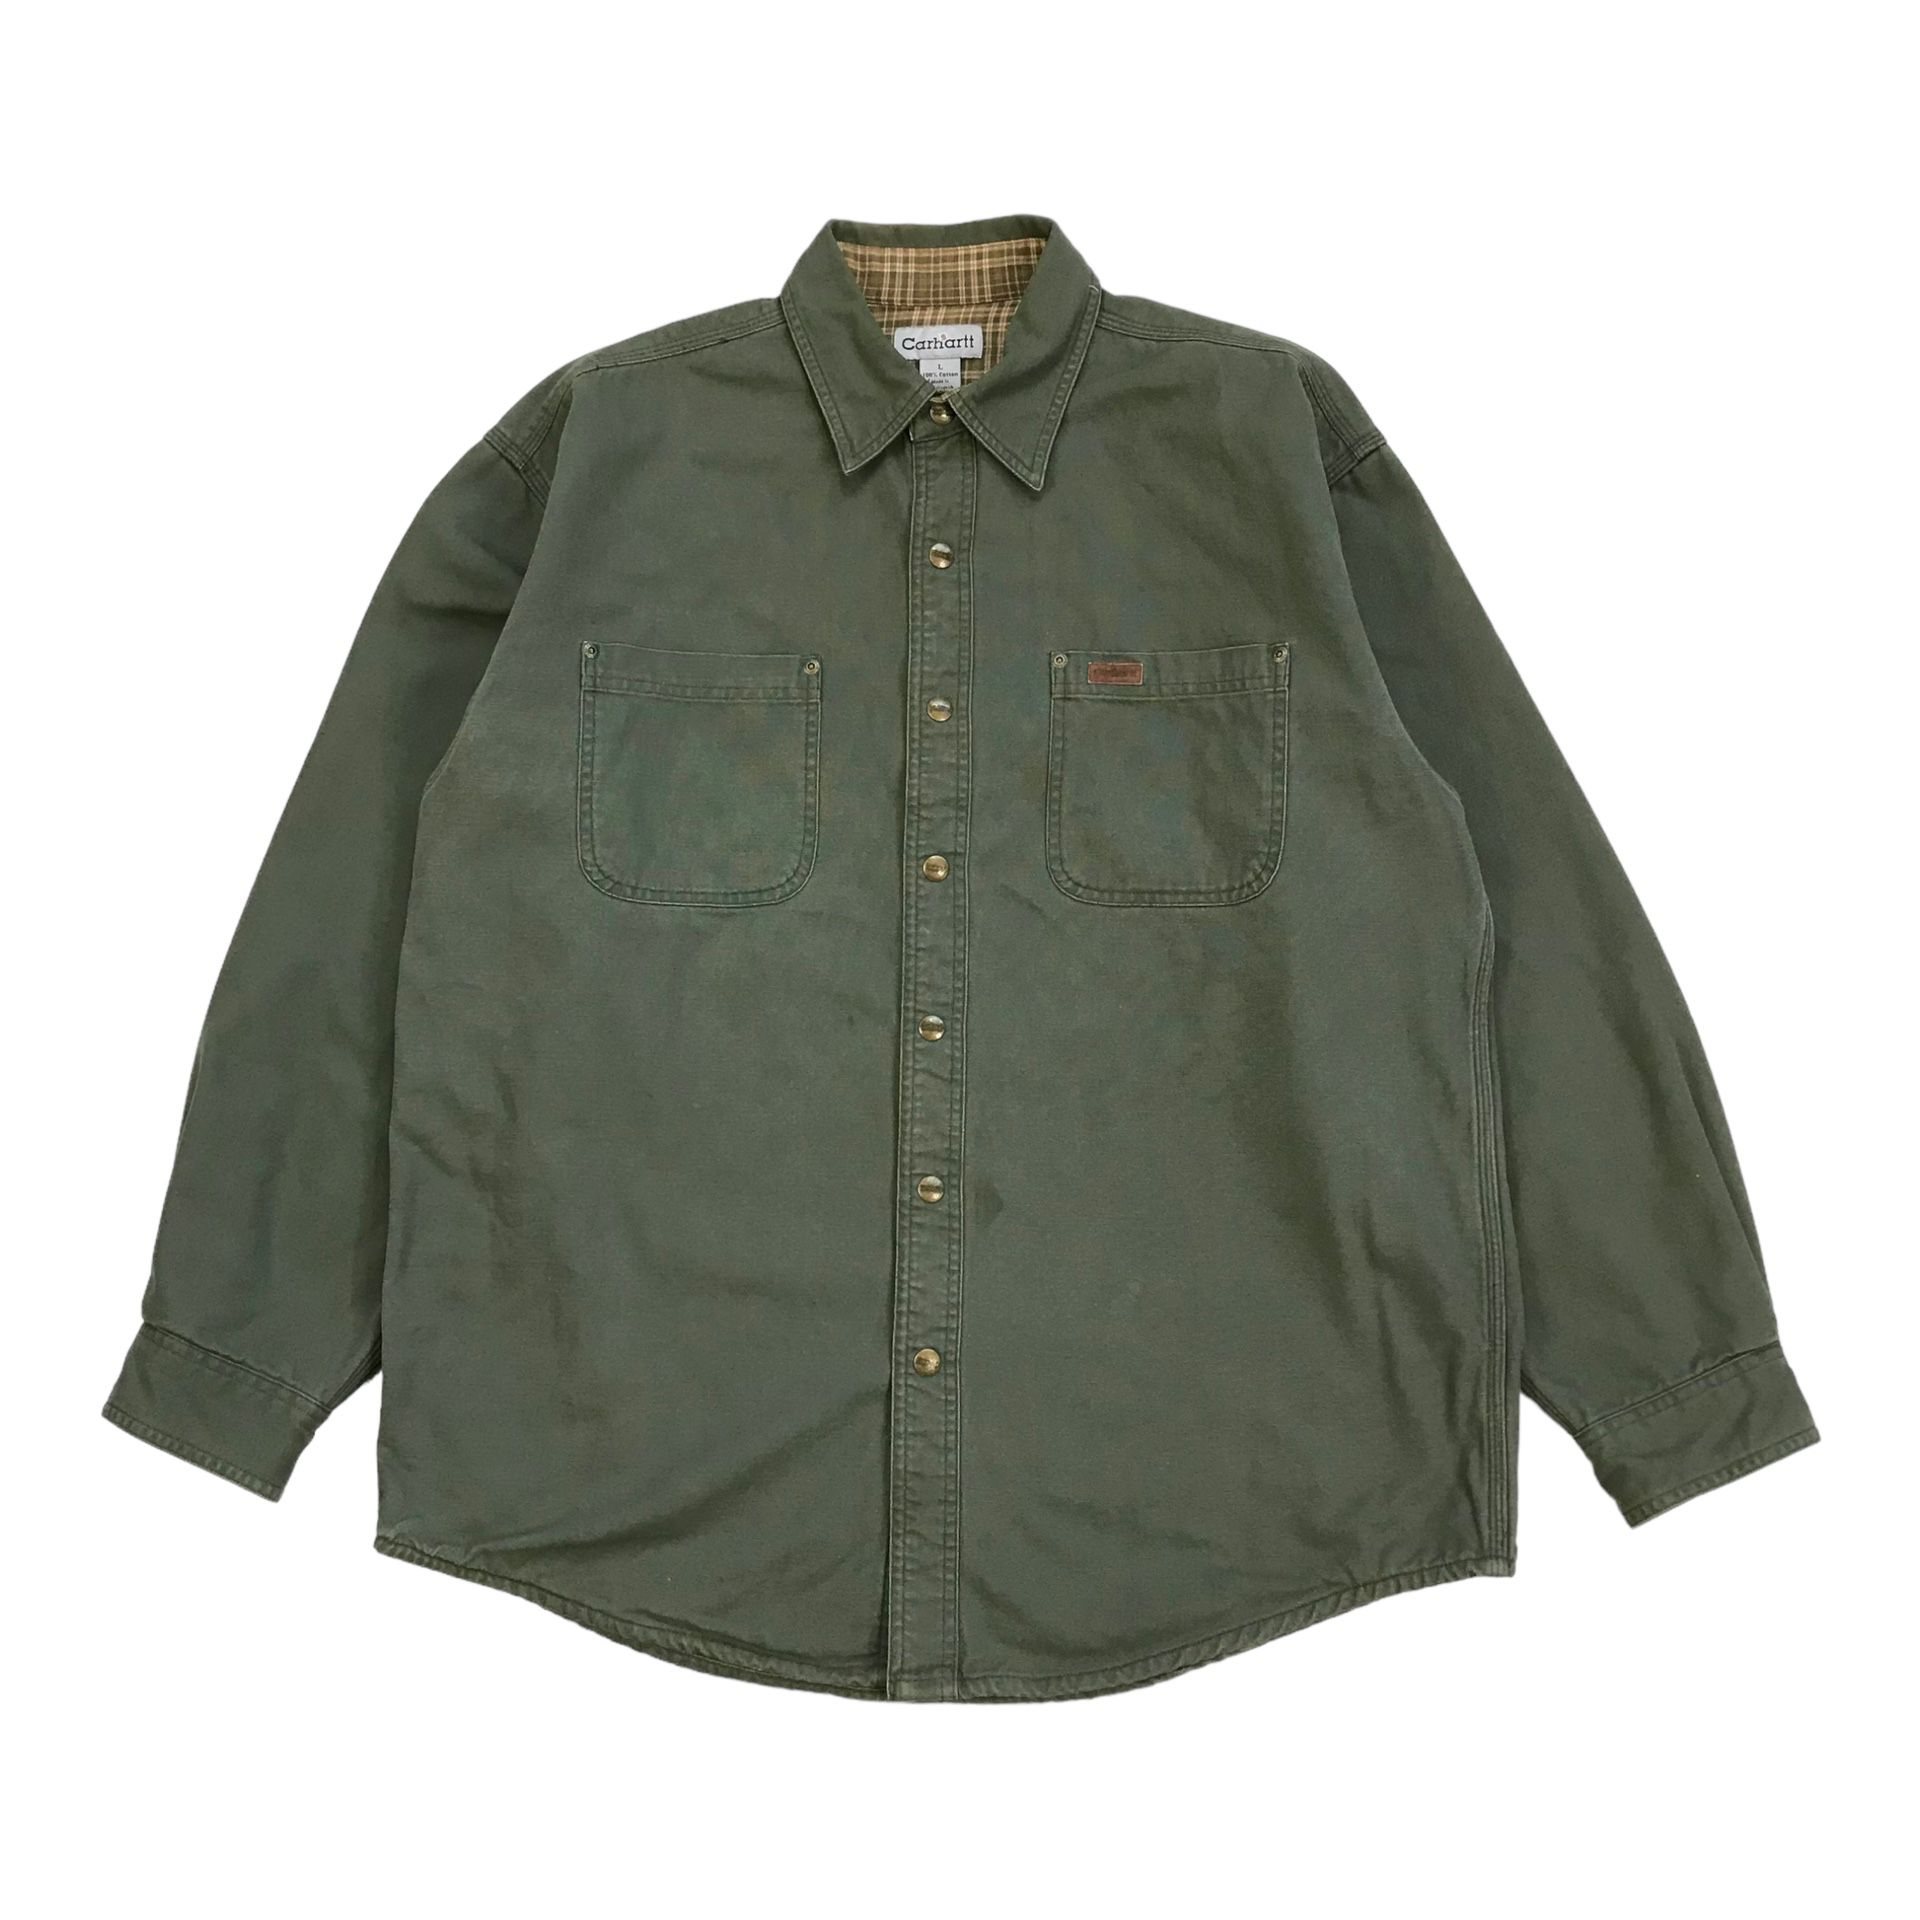 CARHARTT S96 FLANNEL LINED CANVAS SHIRT LARGE L MENS GREEN JACKET SHACKET SNAP